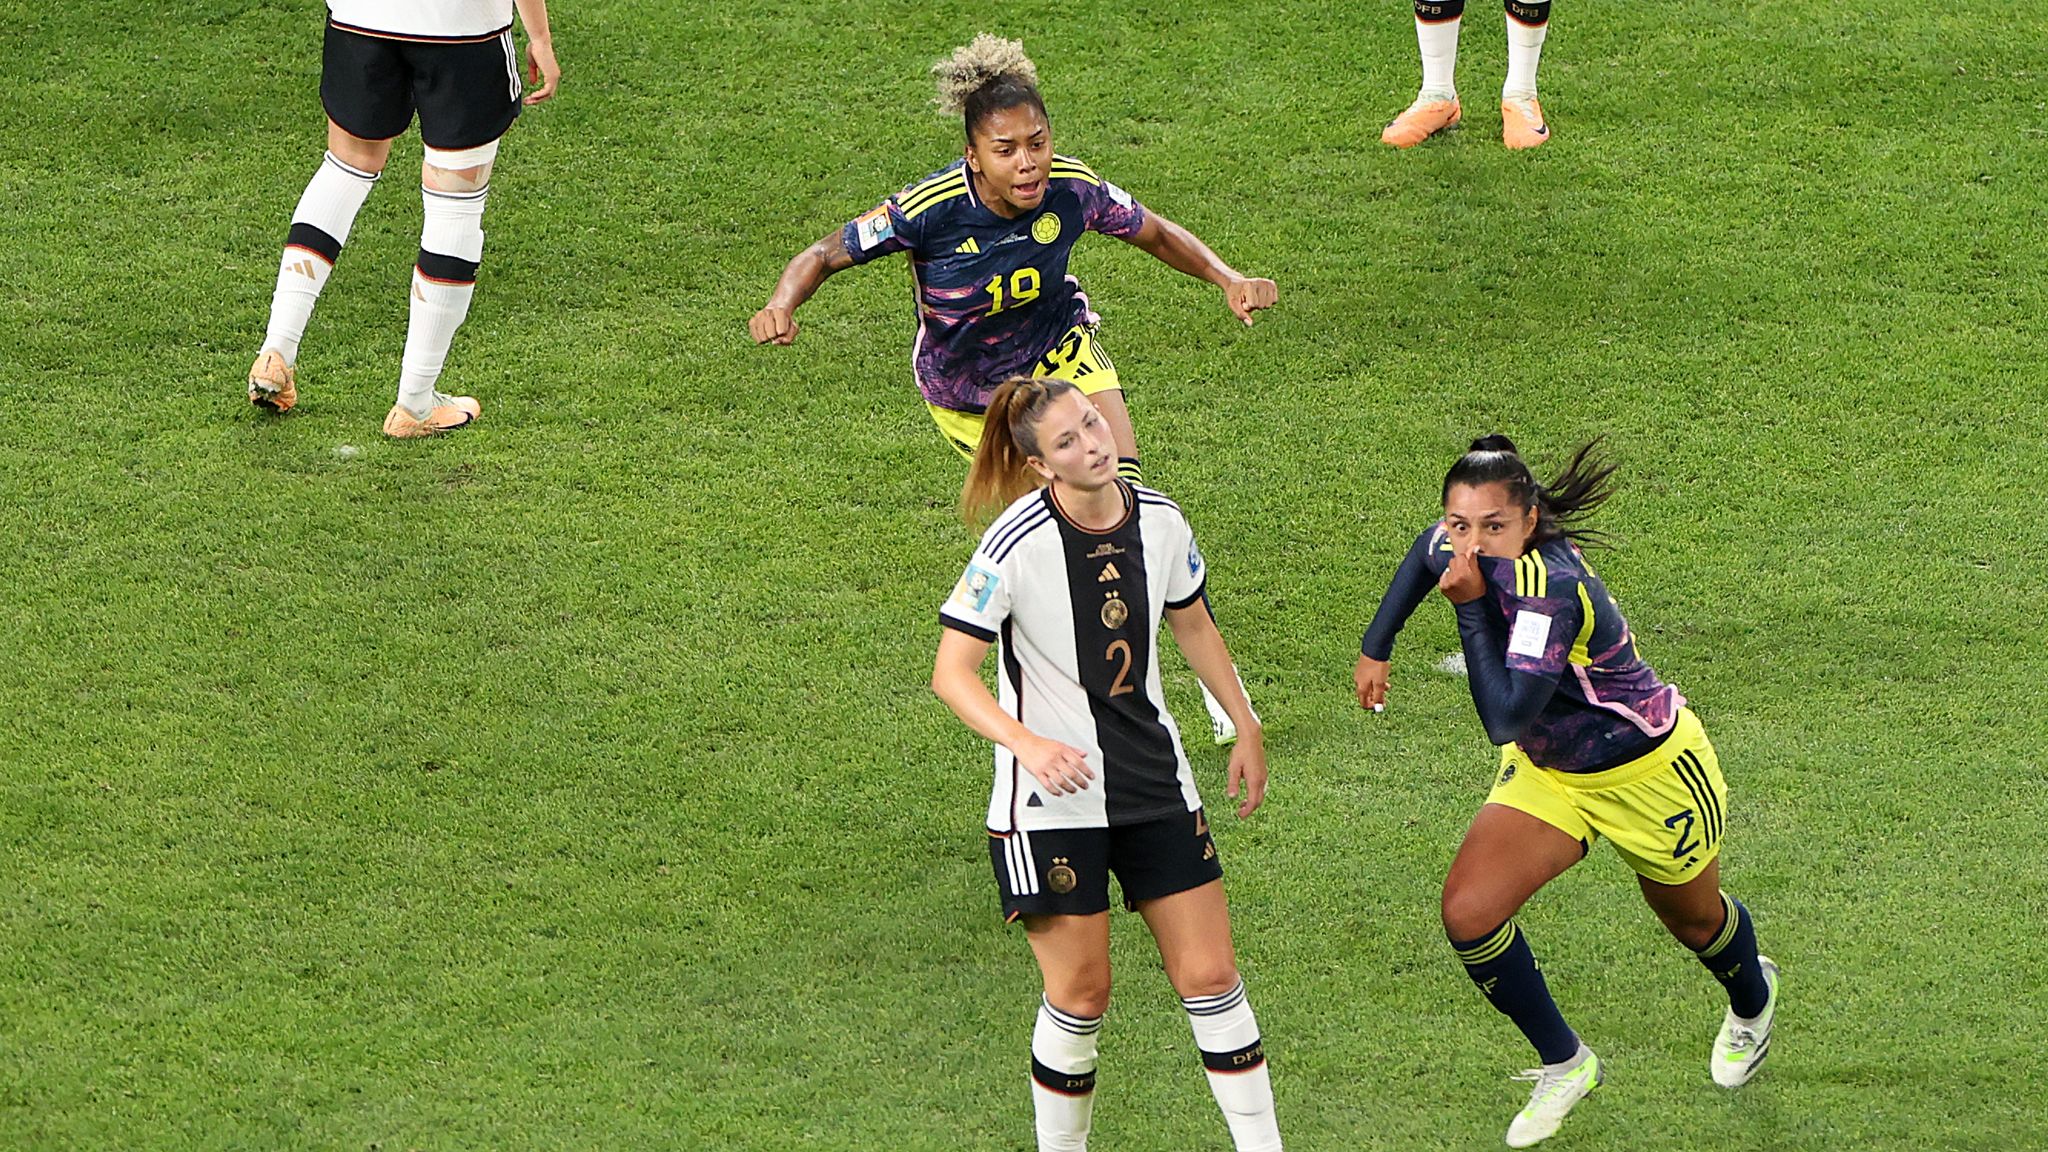 Germany Women 1 2 Colombia Women Match Report & Highlights